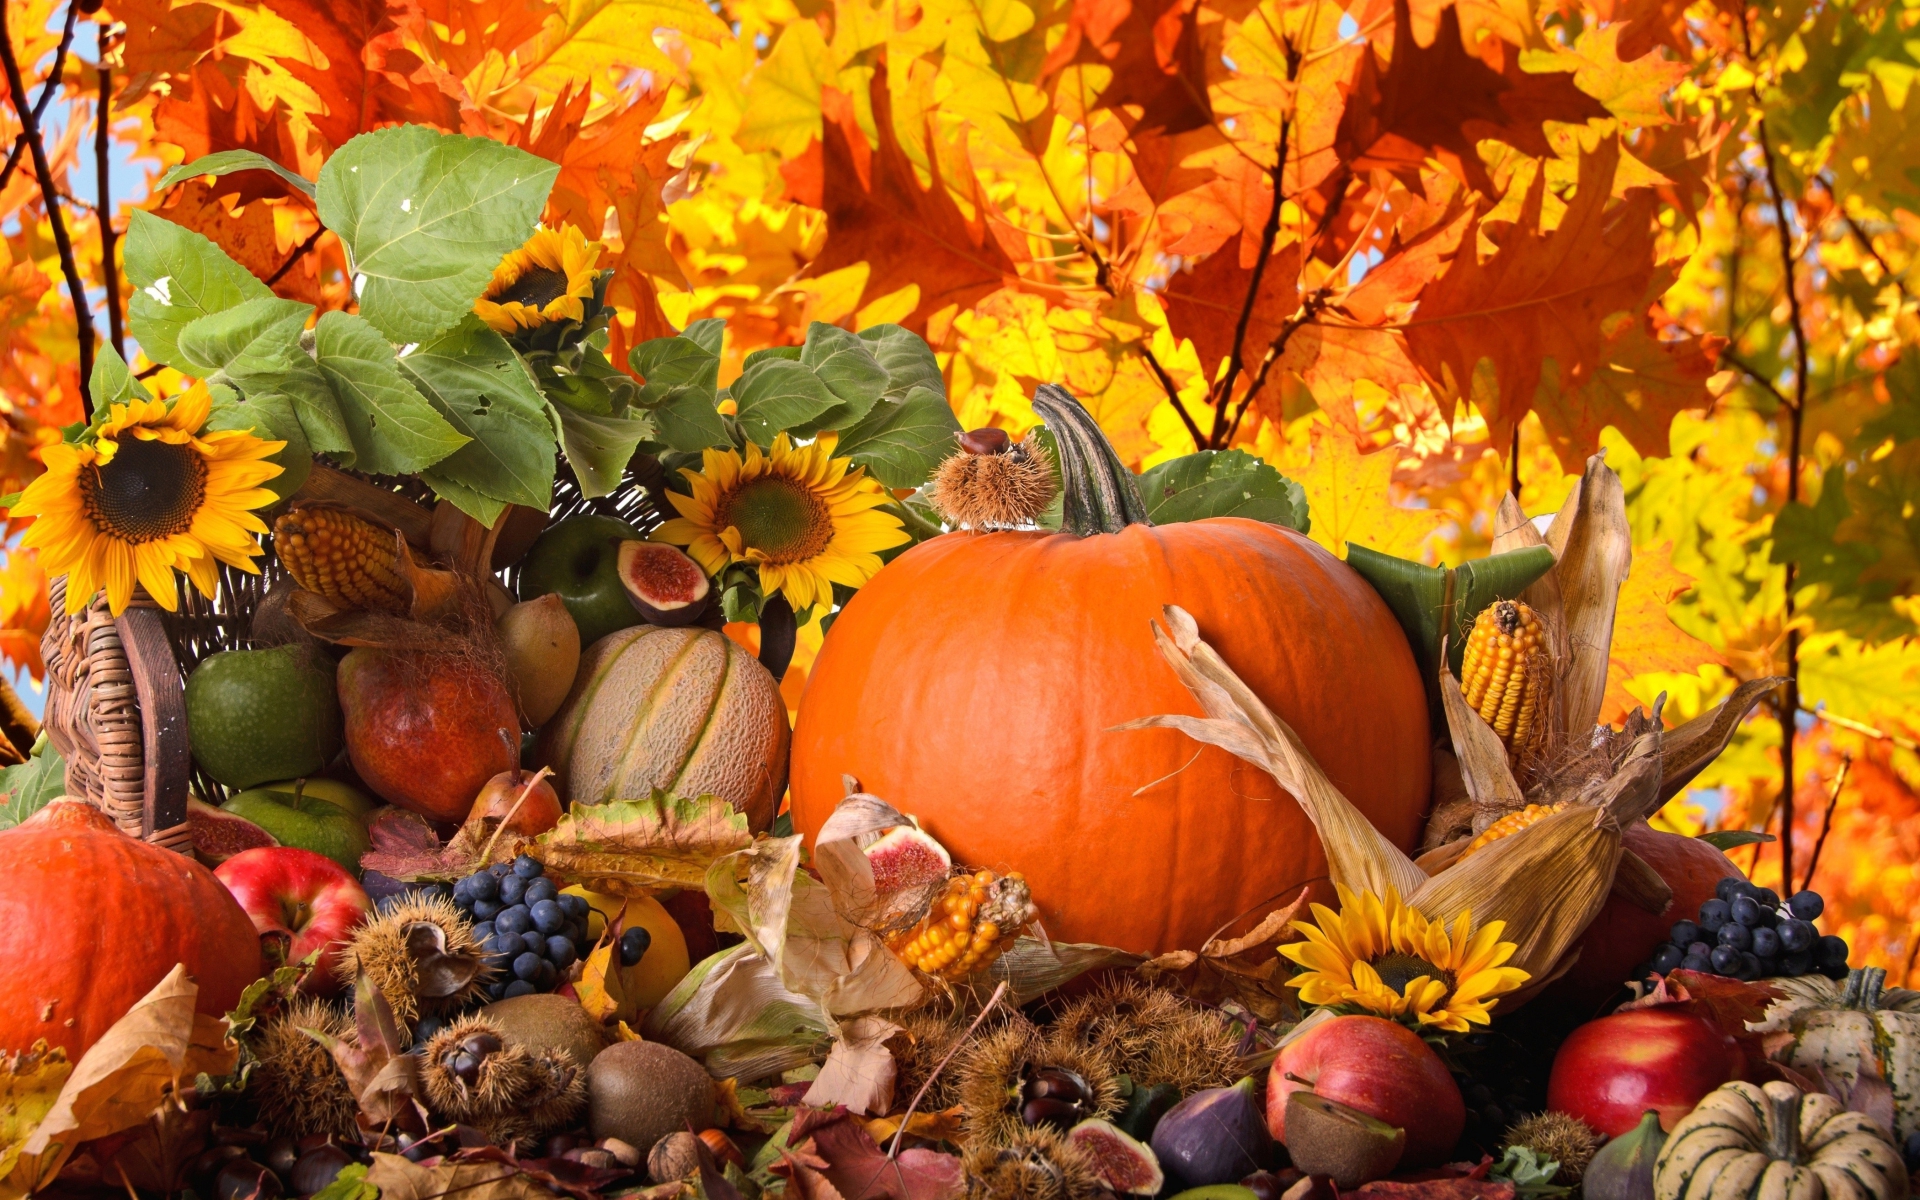  States Thanksgiving Day computer desktop wallpapers pictures images